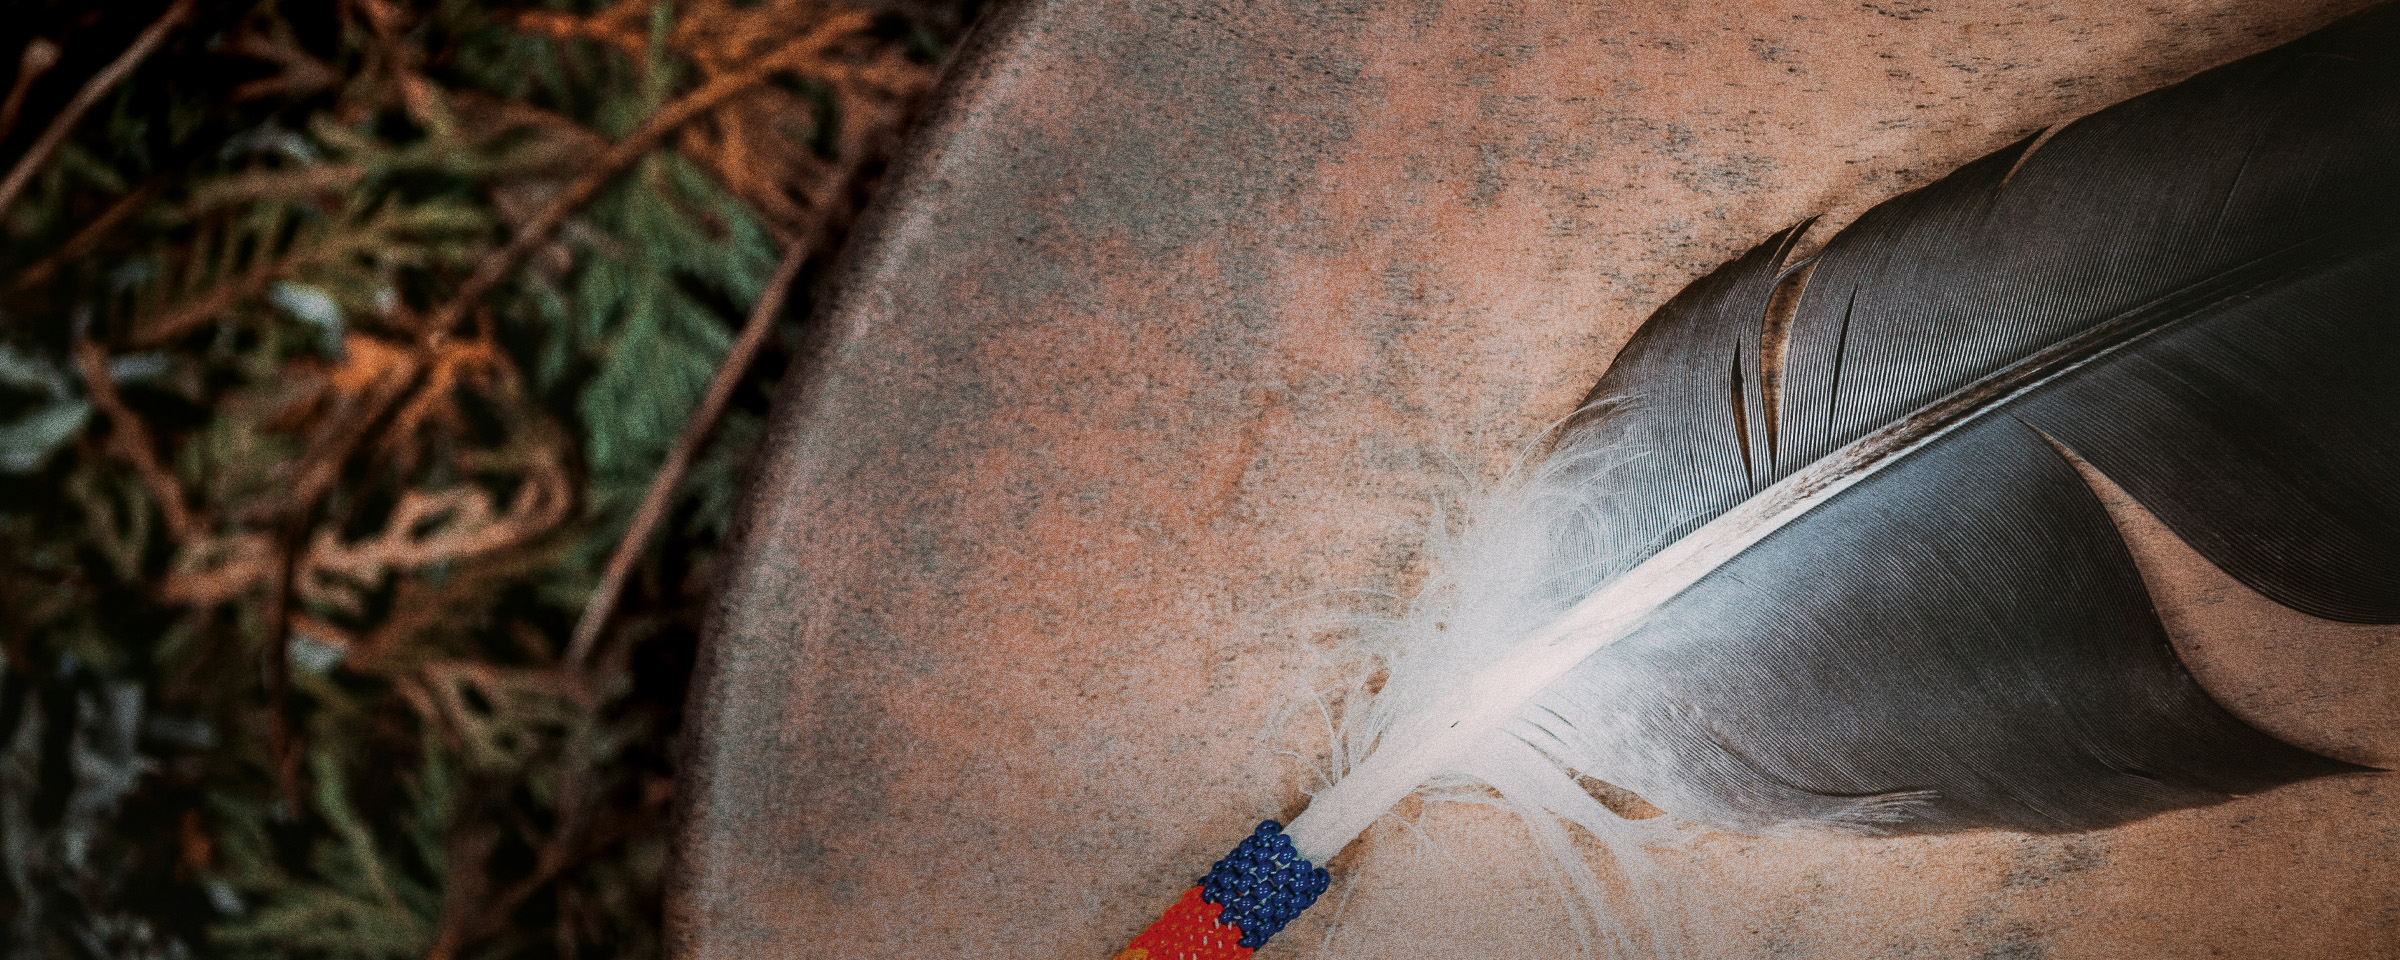 Close up image of feather on drum.